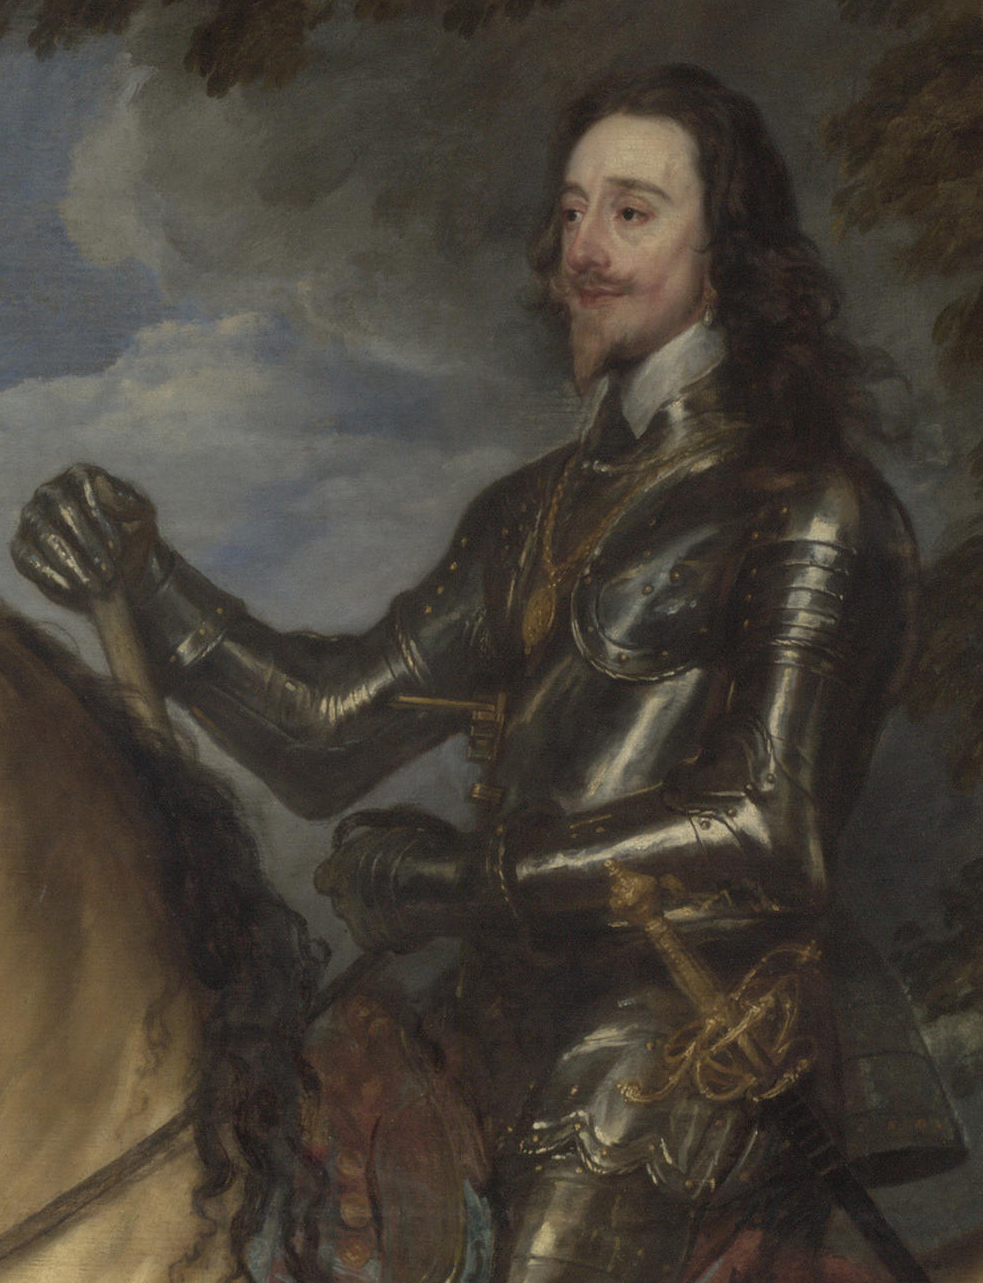 Anthony van Dyck, Equestrian Portrait of Charles I, detail, c. 1637-8, oil on canvas, 367 x 292.1 cm (National Gallery, London)